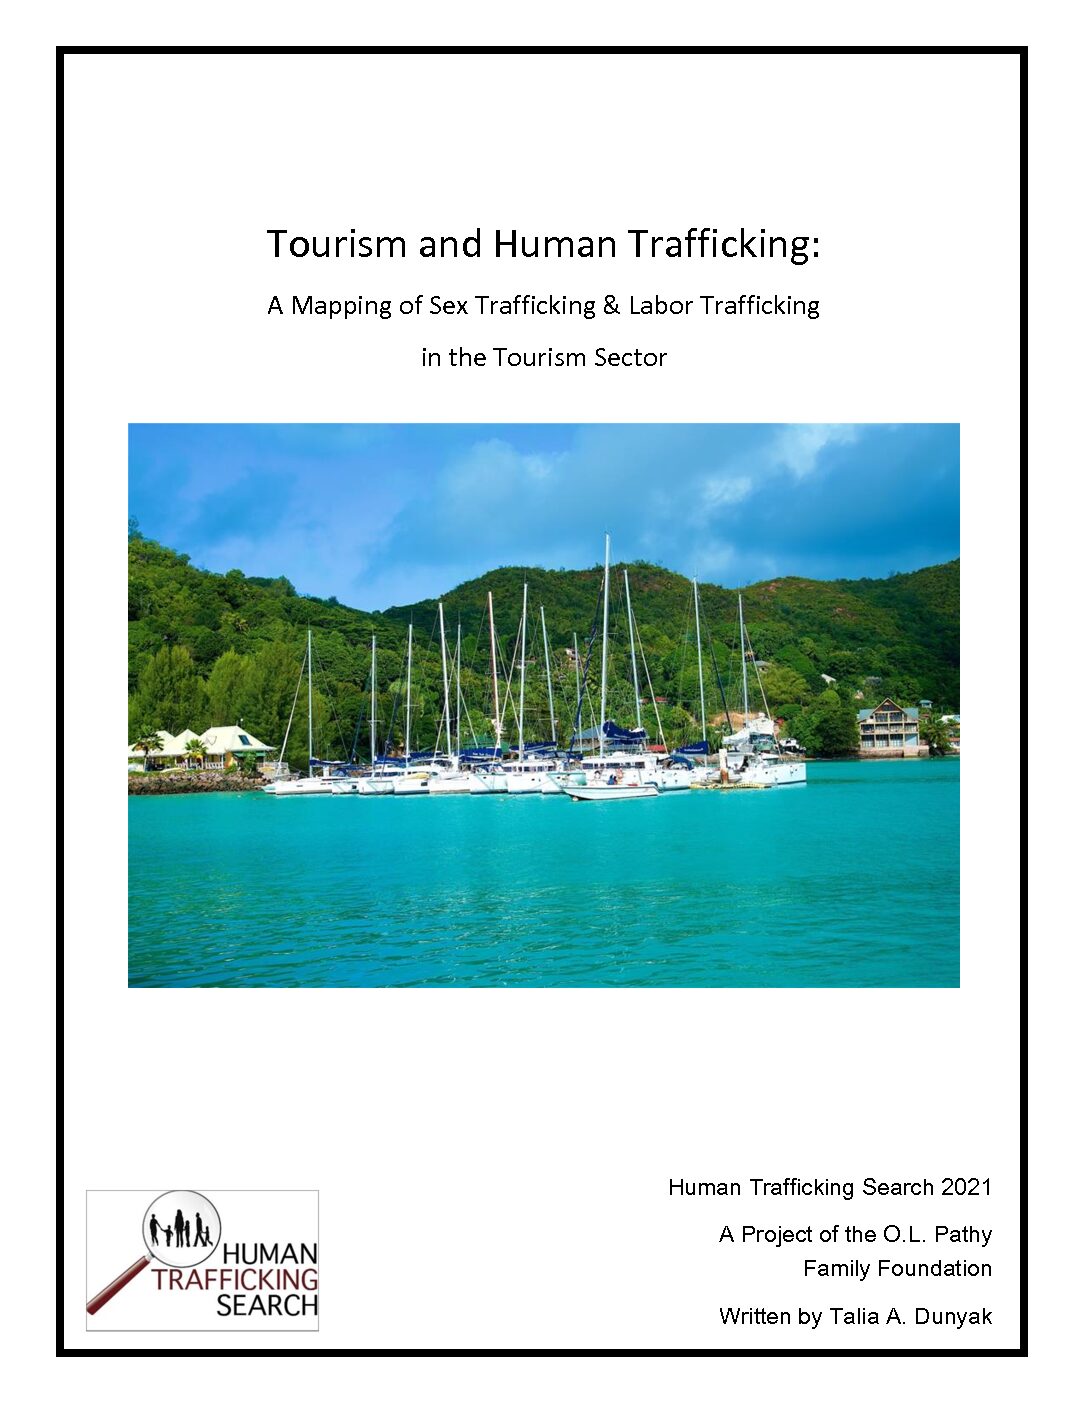 Tourism And Human Trafficking A Mapping Of Sex Trafficking And Labor Trafficking In The Tourism